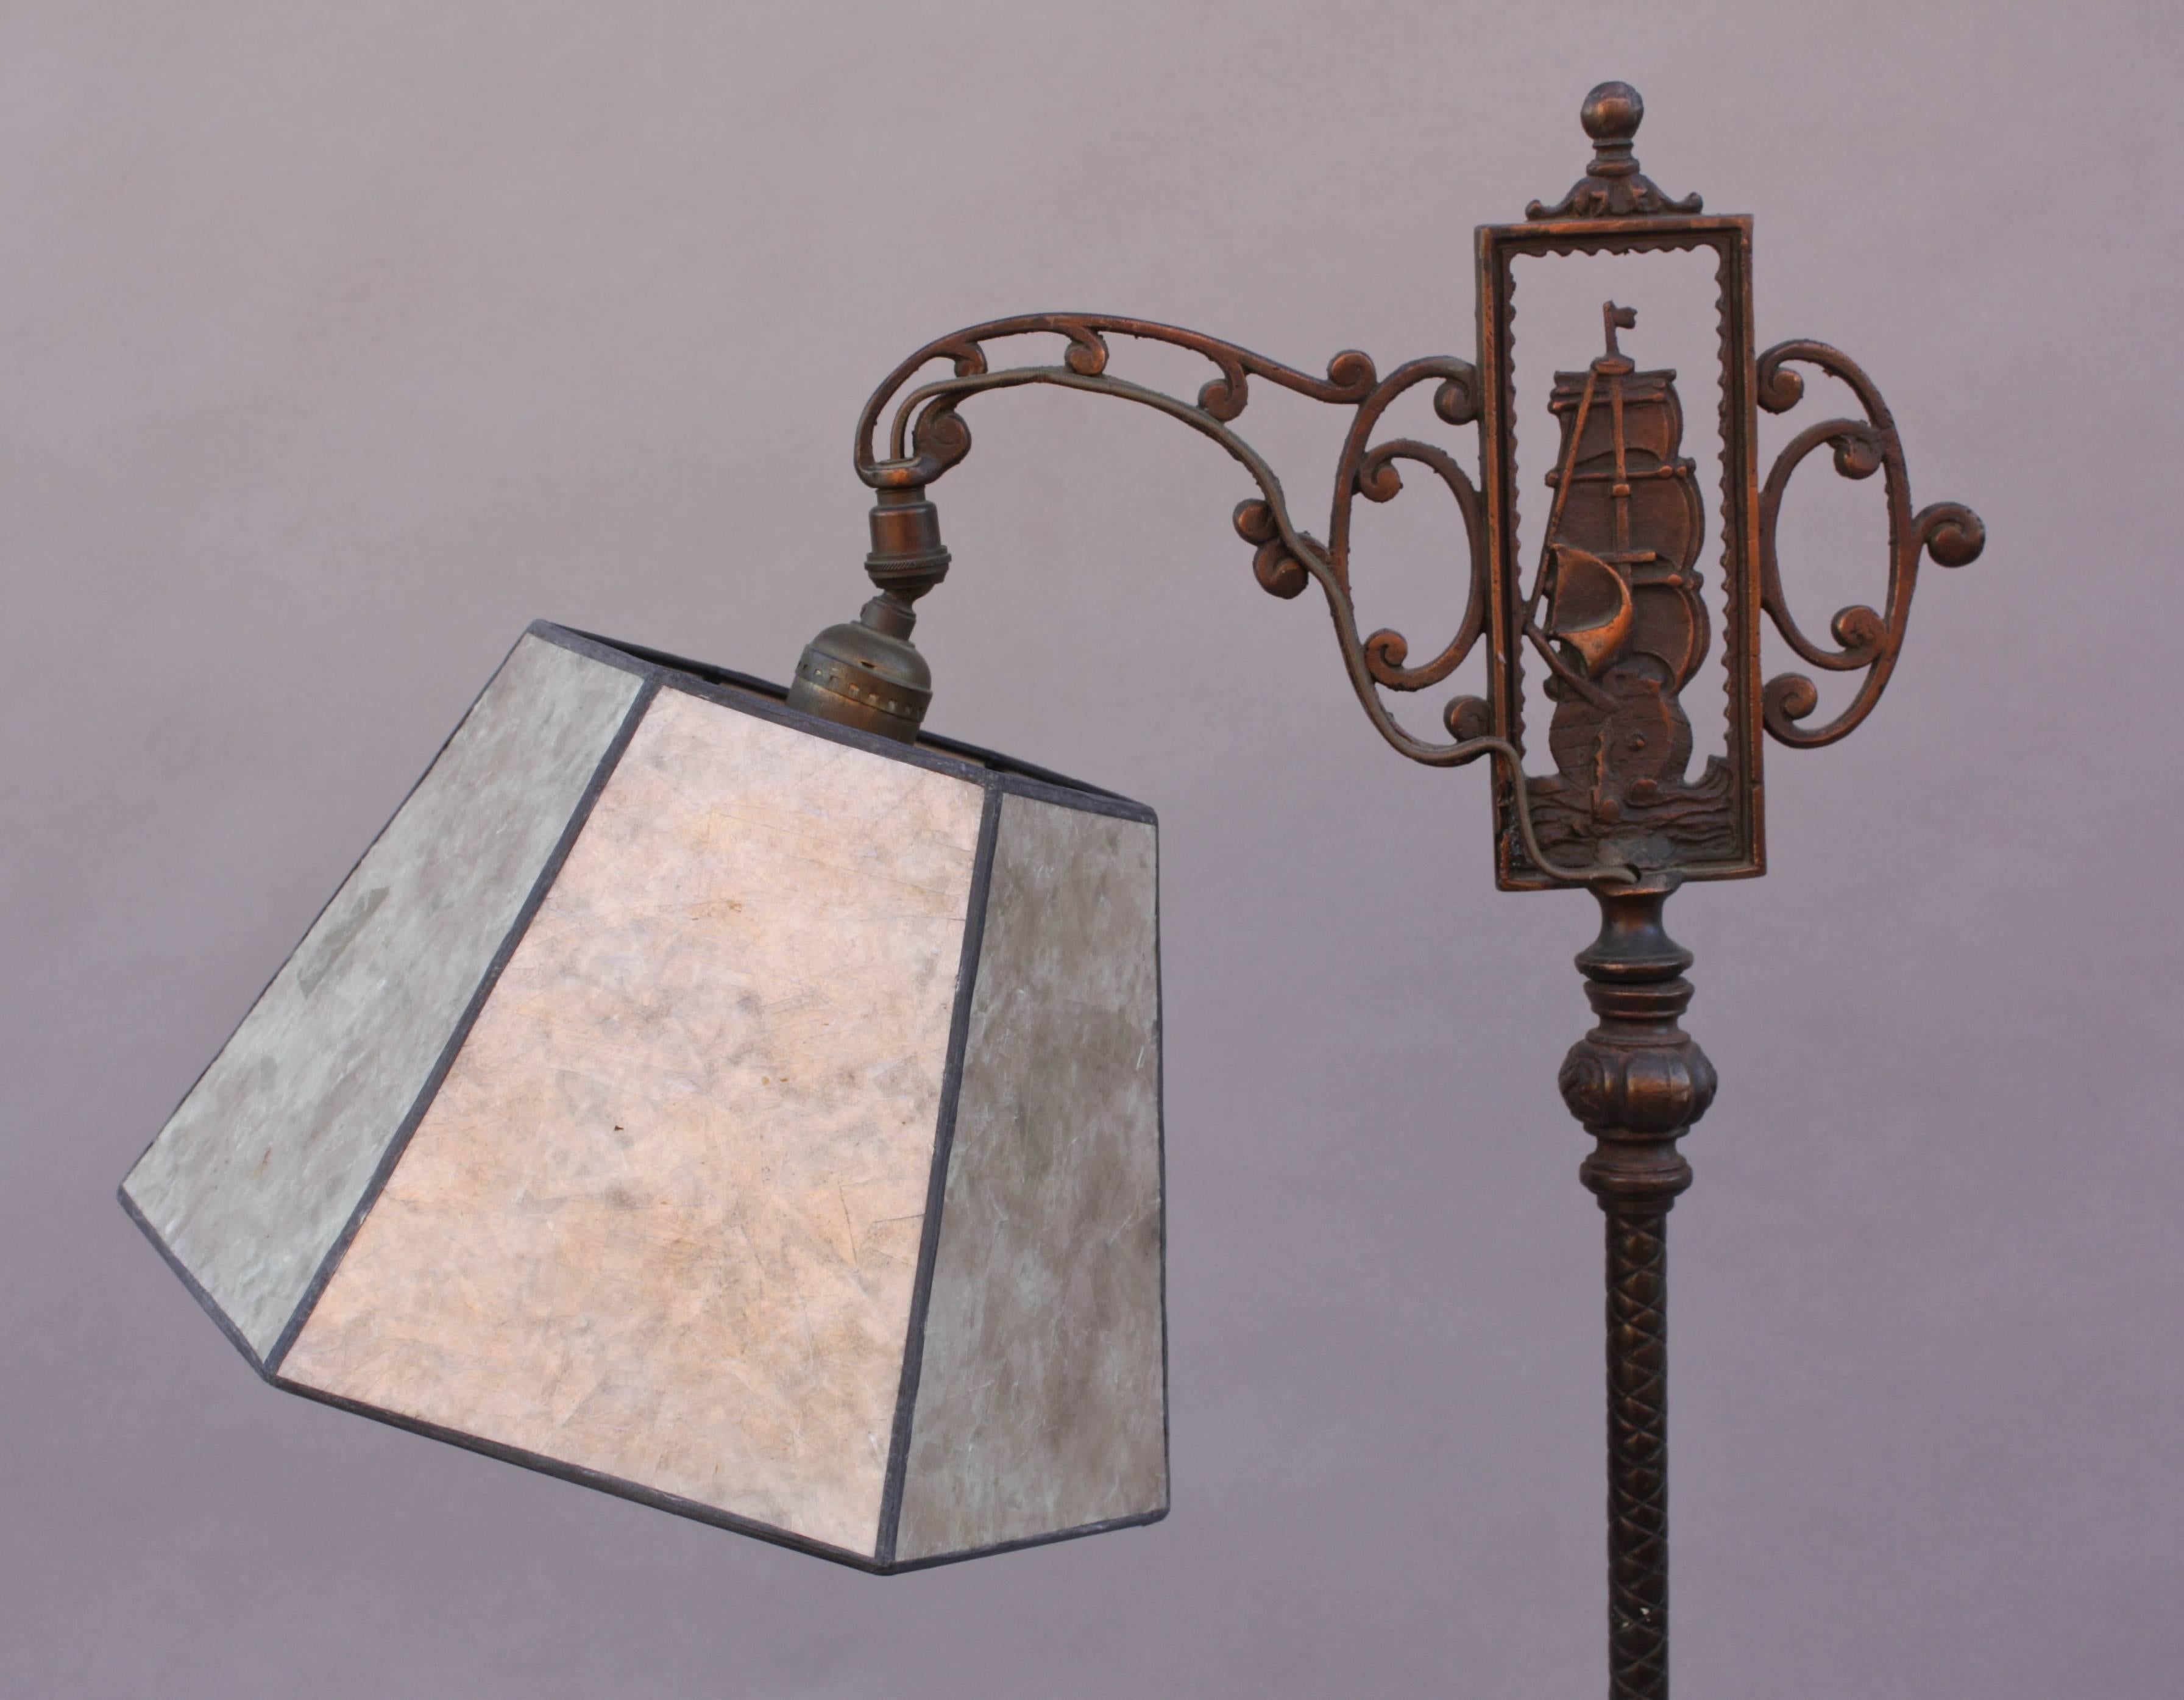 Spanish Colonial 1920s Floor Lamp with Galleon Motif